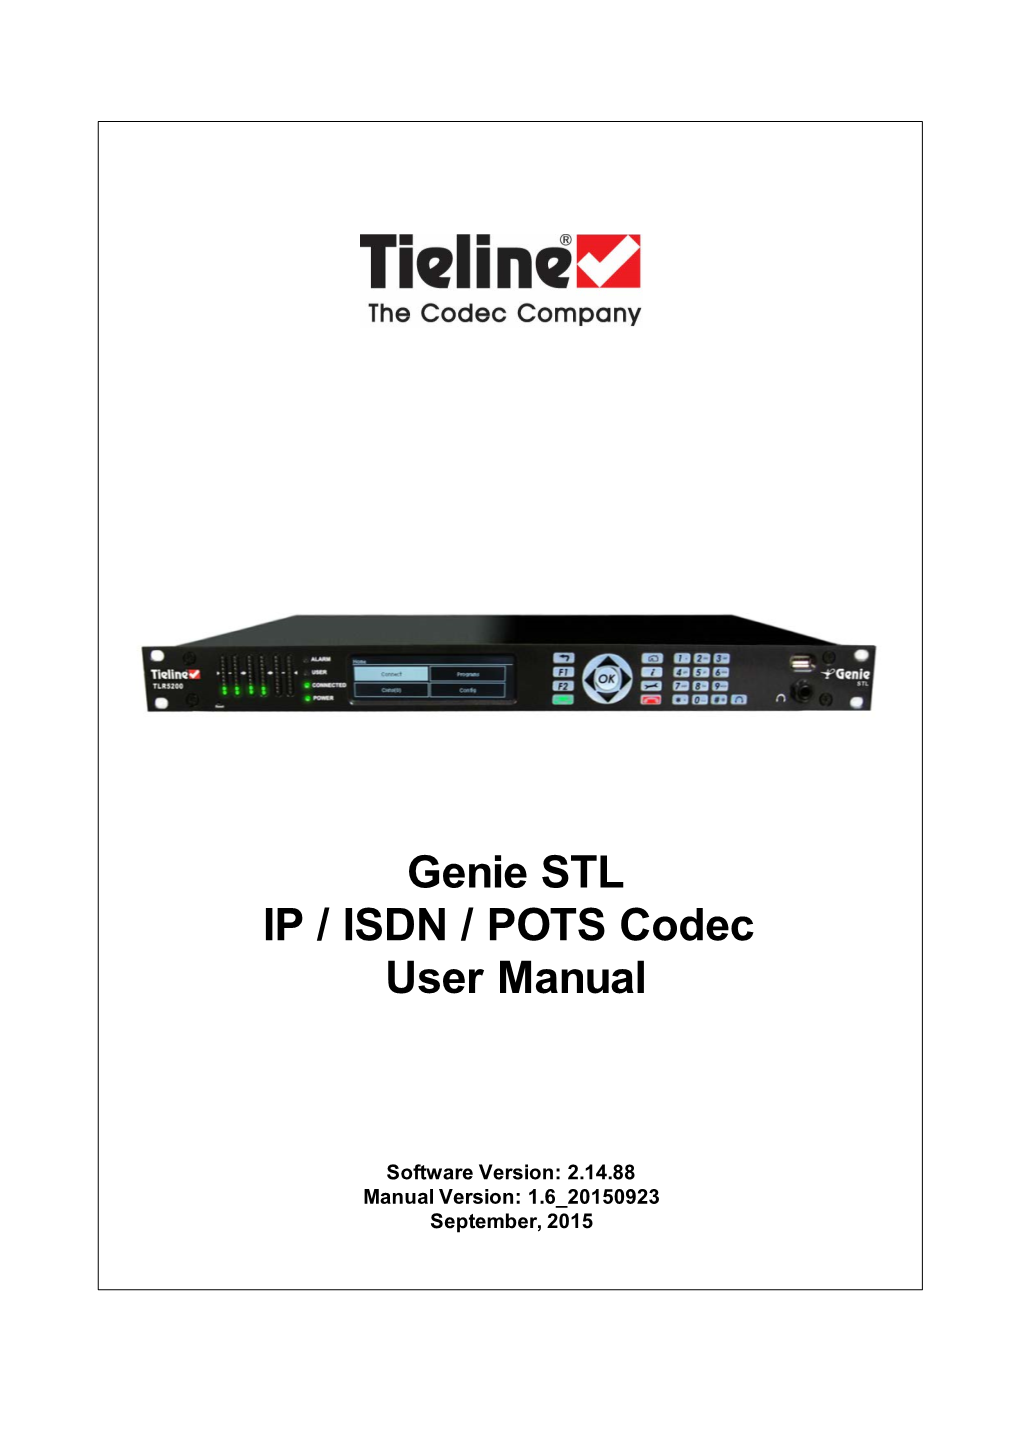 Genie STL User Manual V1.6 Table of Contents